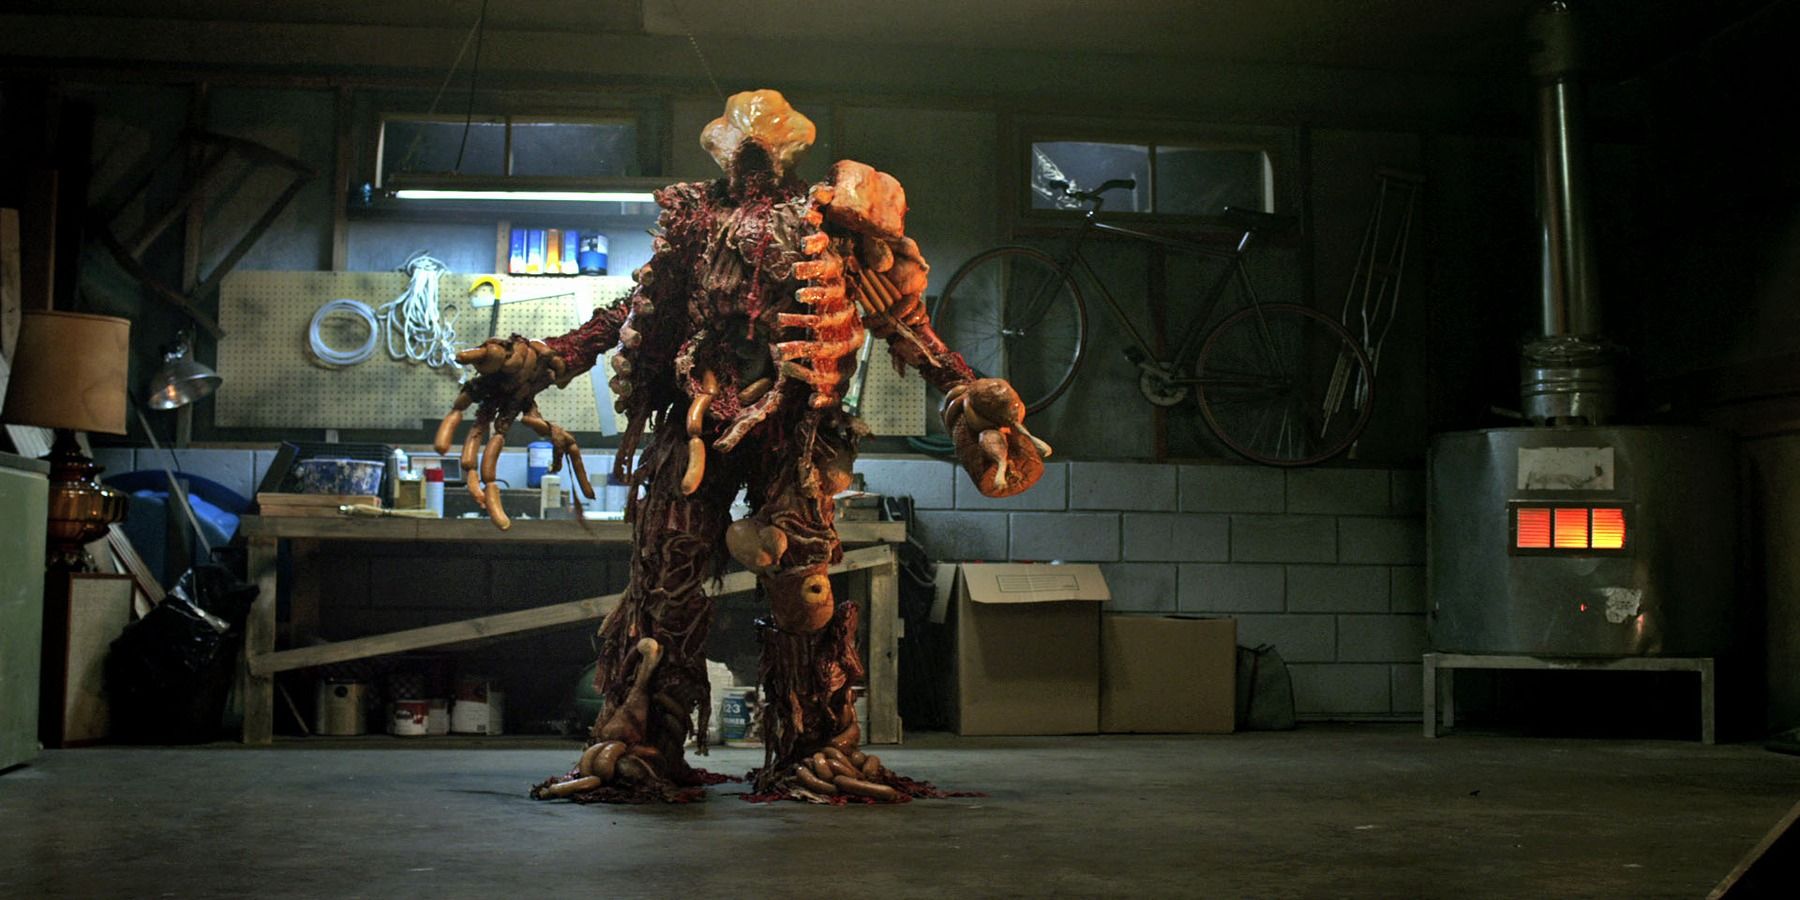 A meat monster from John Dies at the End (2012)